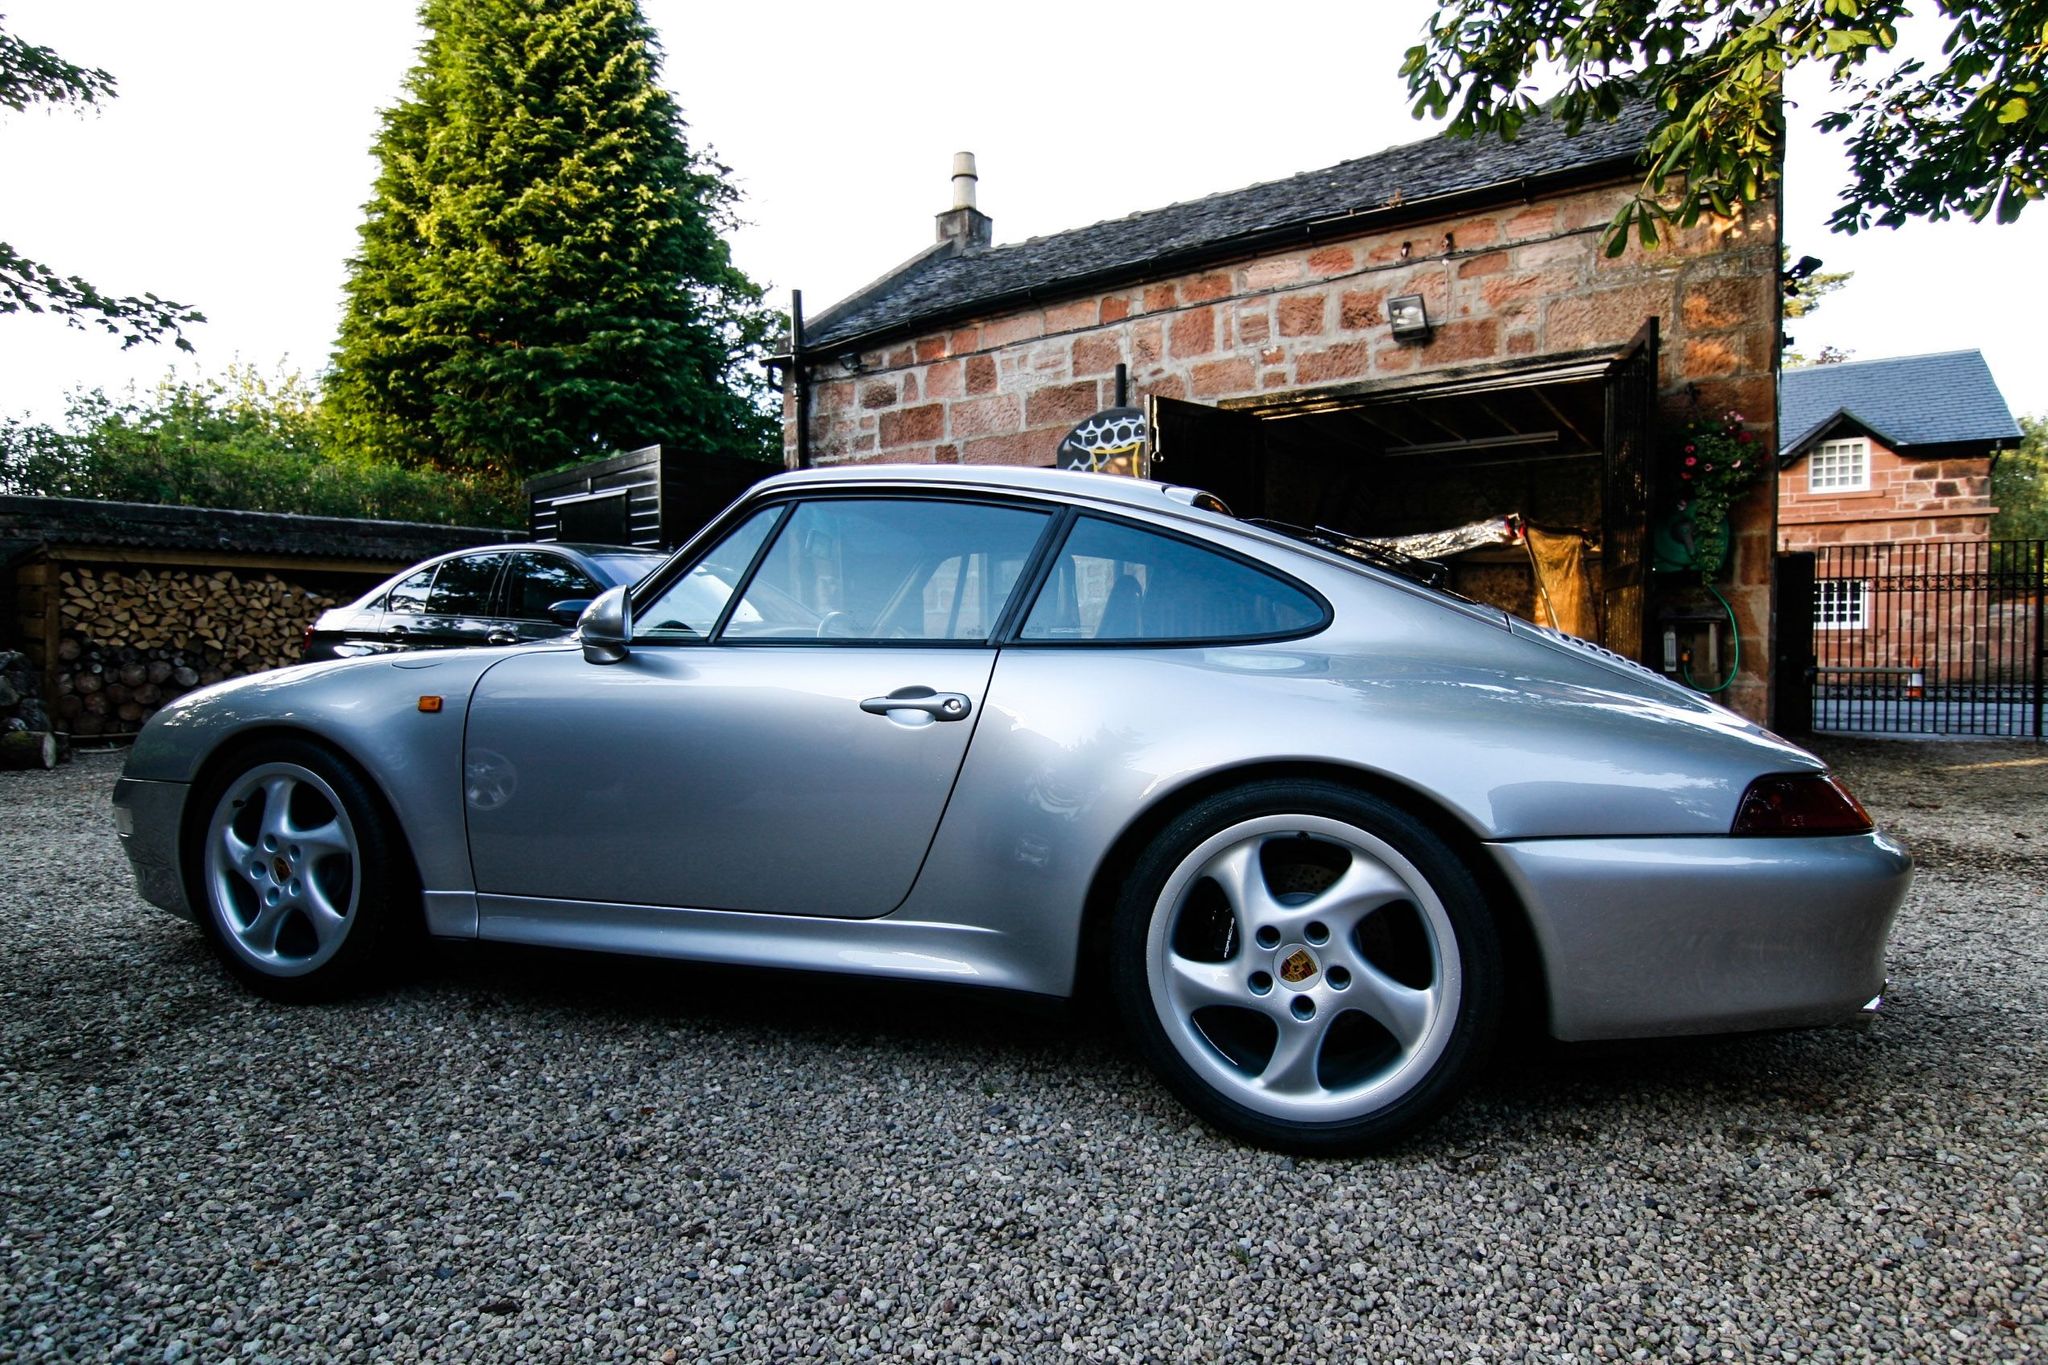 Used Porsche 911 993 Carrera S Cars For Sale | AutoTrader UK